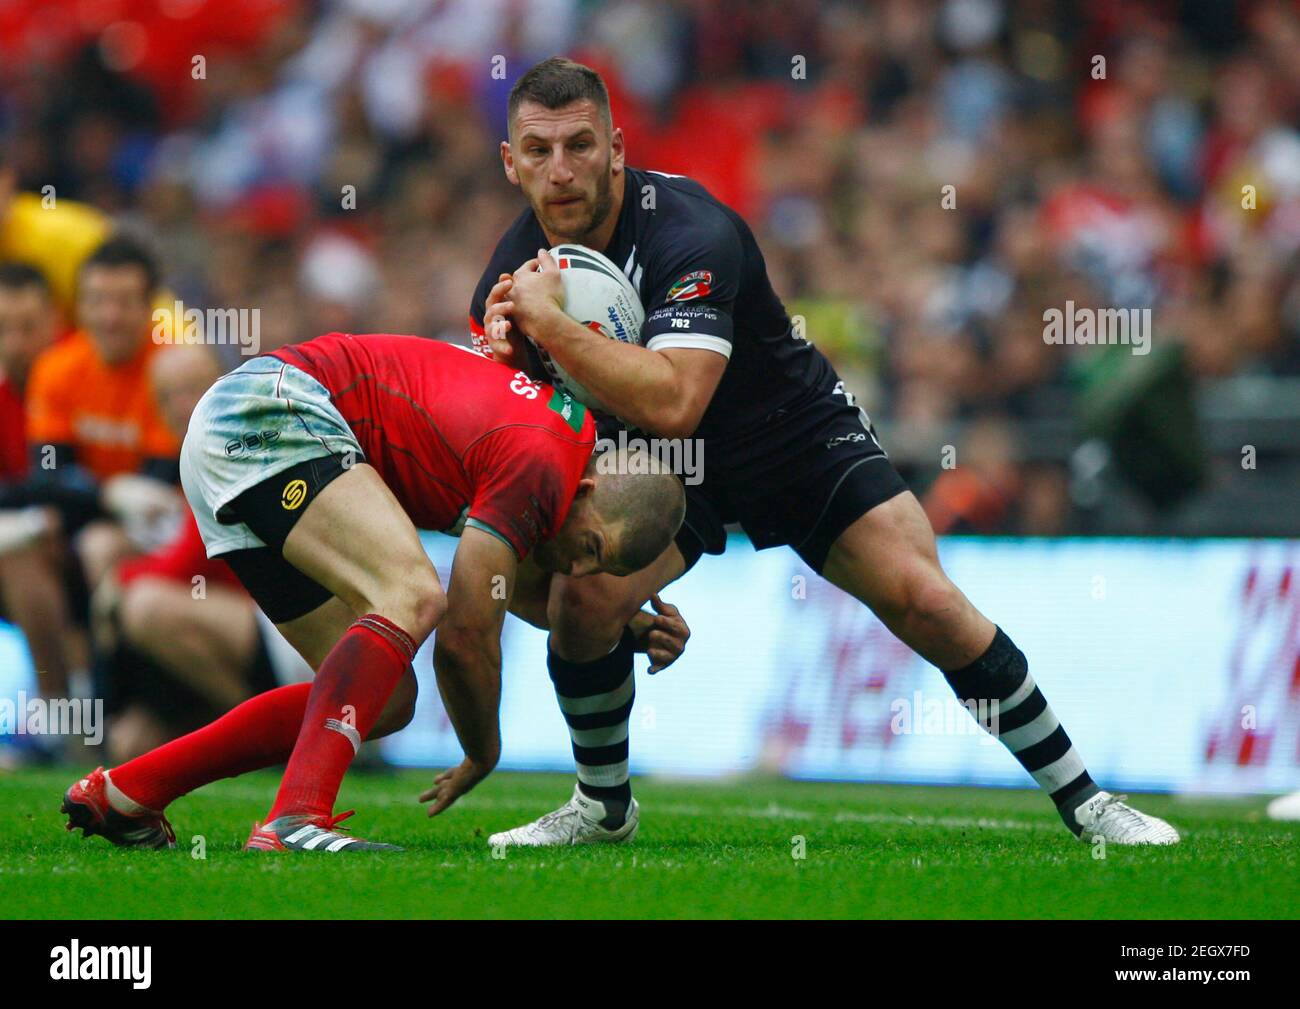 Rugby League - Wales v New Zealand - Gillette Four Nations 2011 - Wembley Stadium - 5/11/11  New Zealand's Lewis Brown in action  Mandatory Credit: Action Images / Peter Cziborra Stock Photo